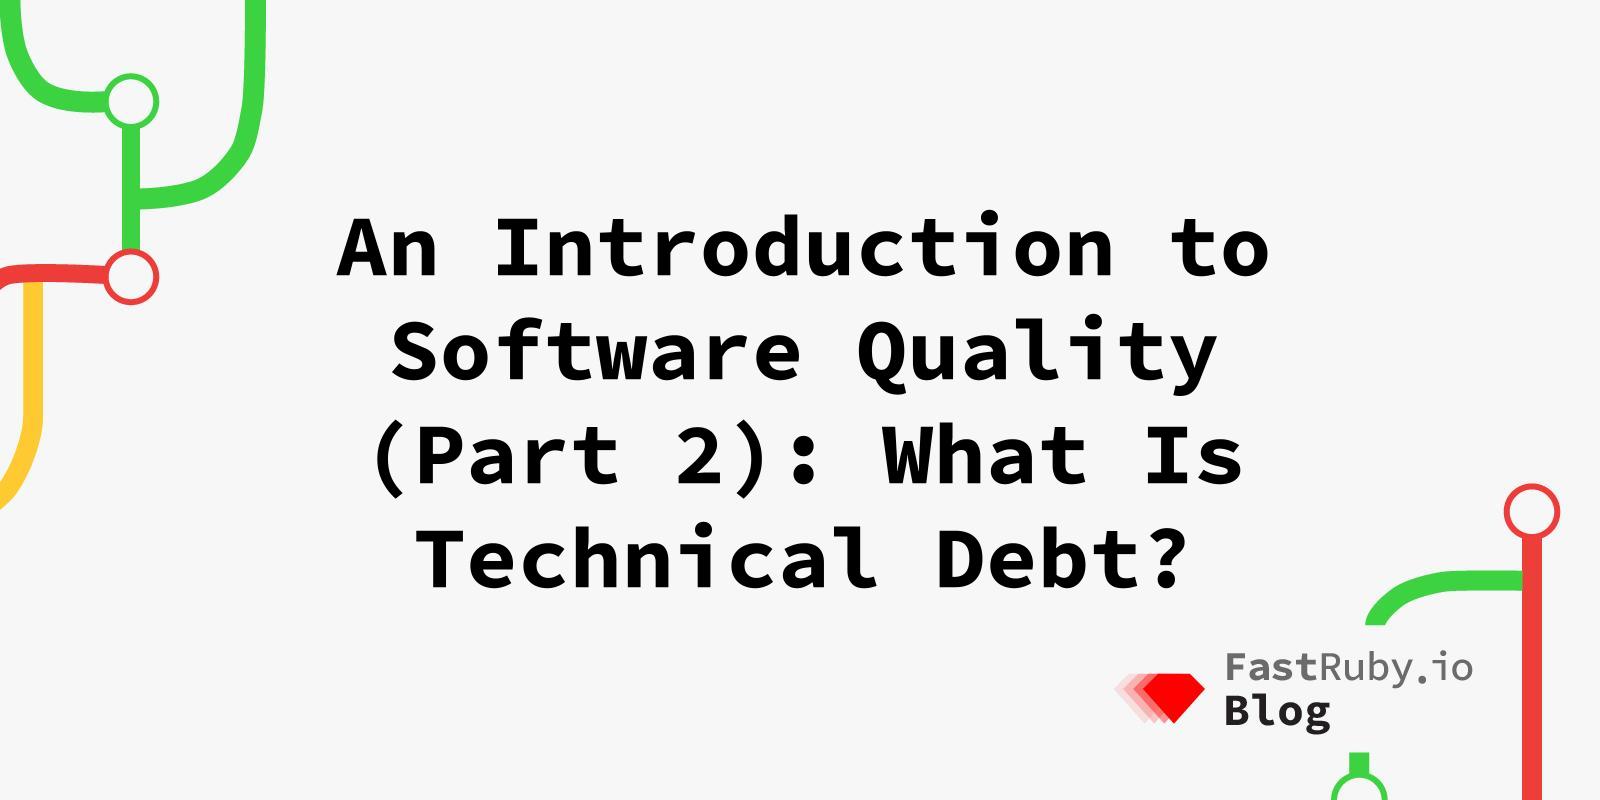 An Introduction to Software Quality (Part 2): What Is Technical Debt?